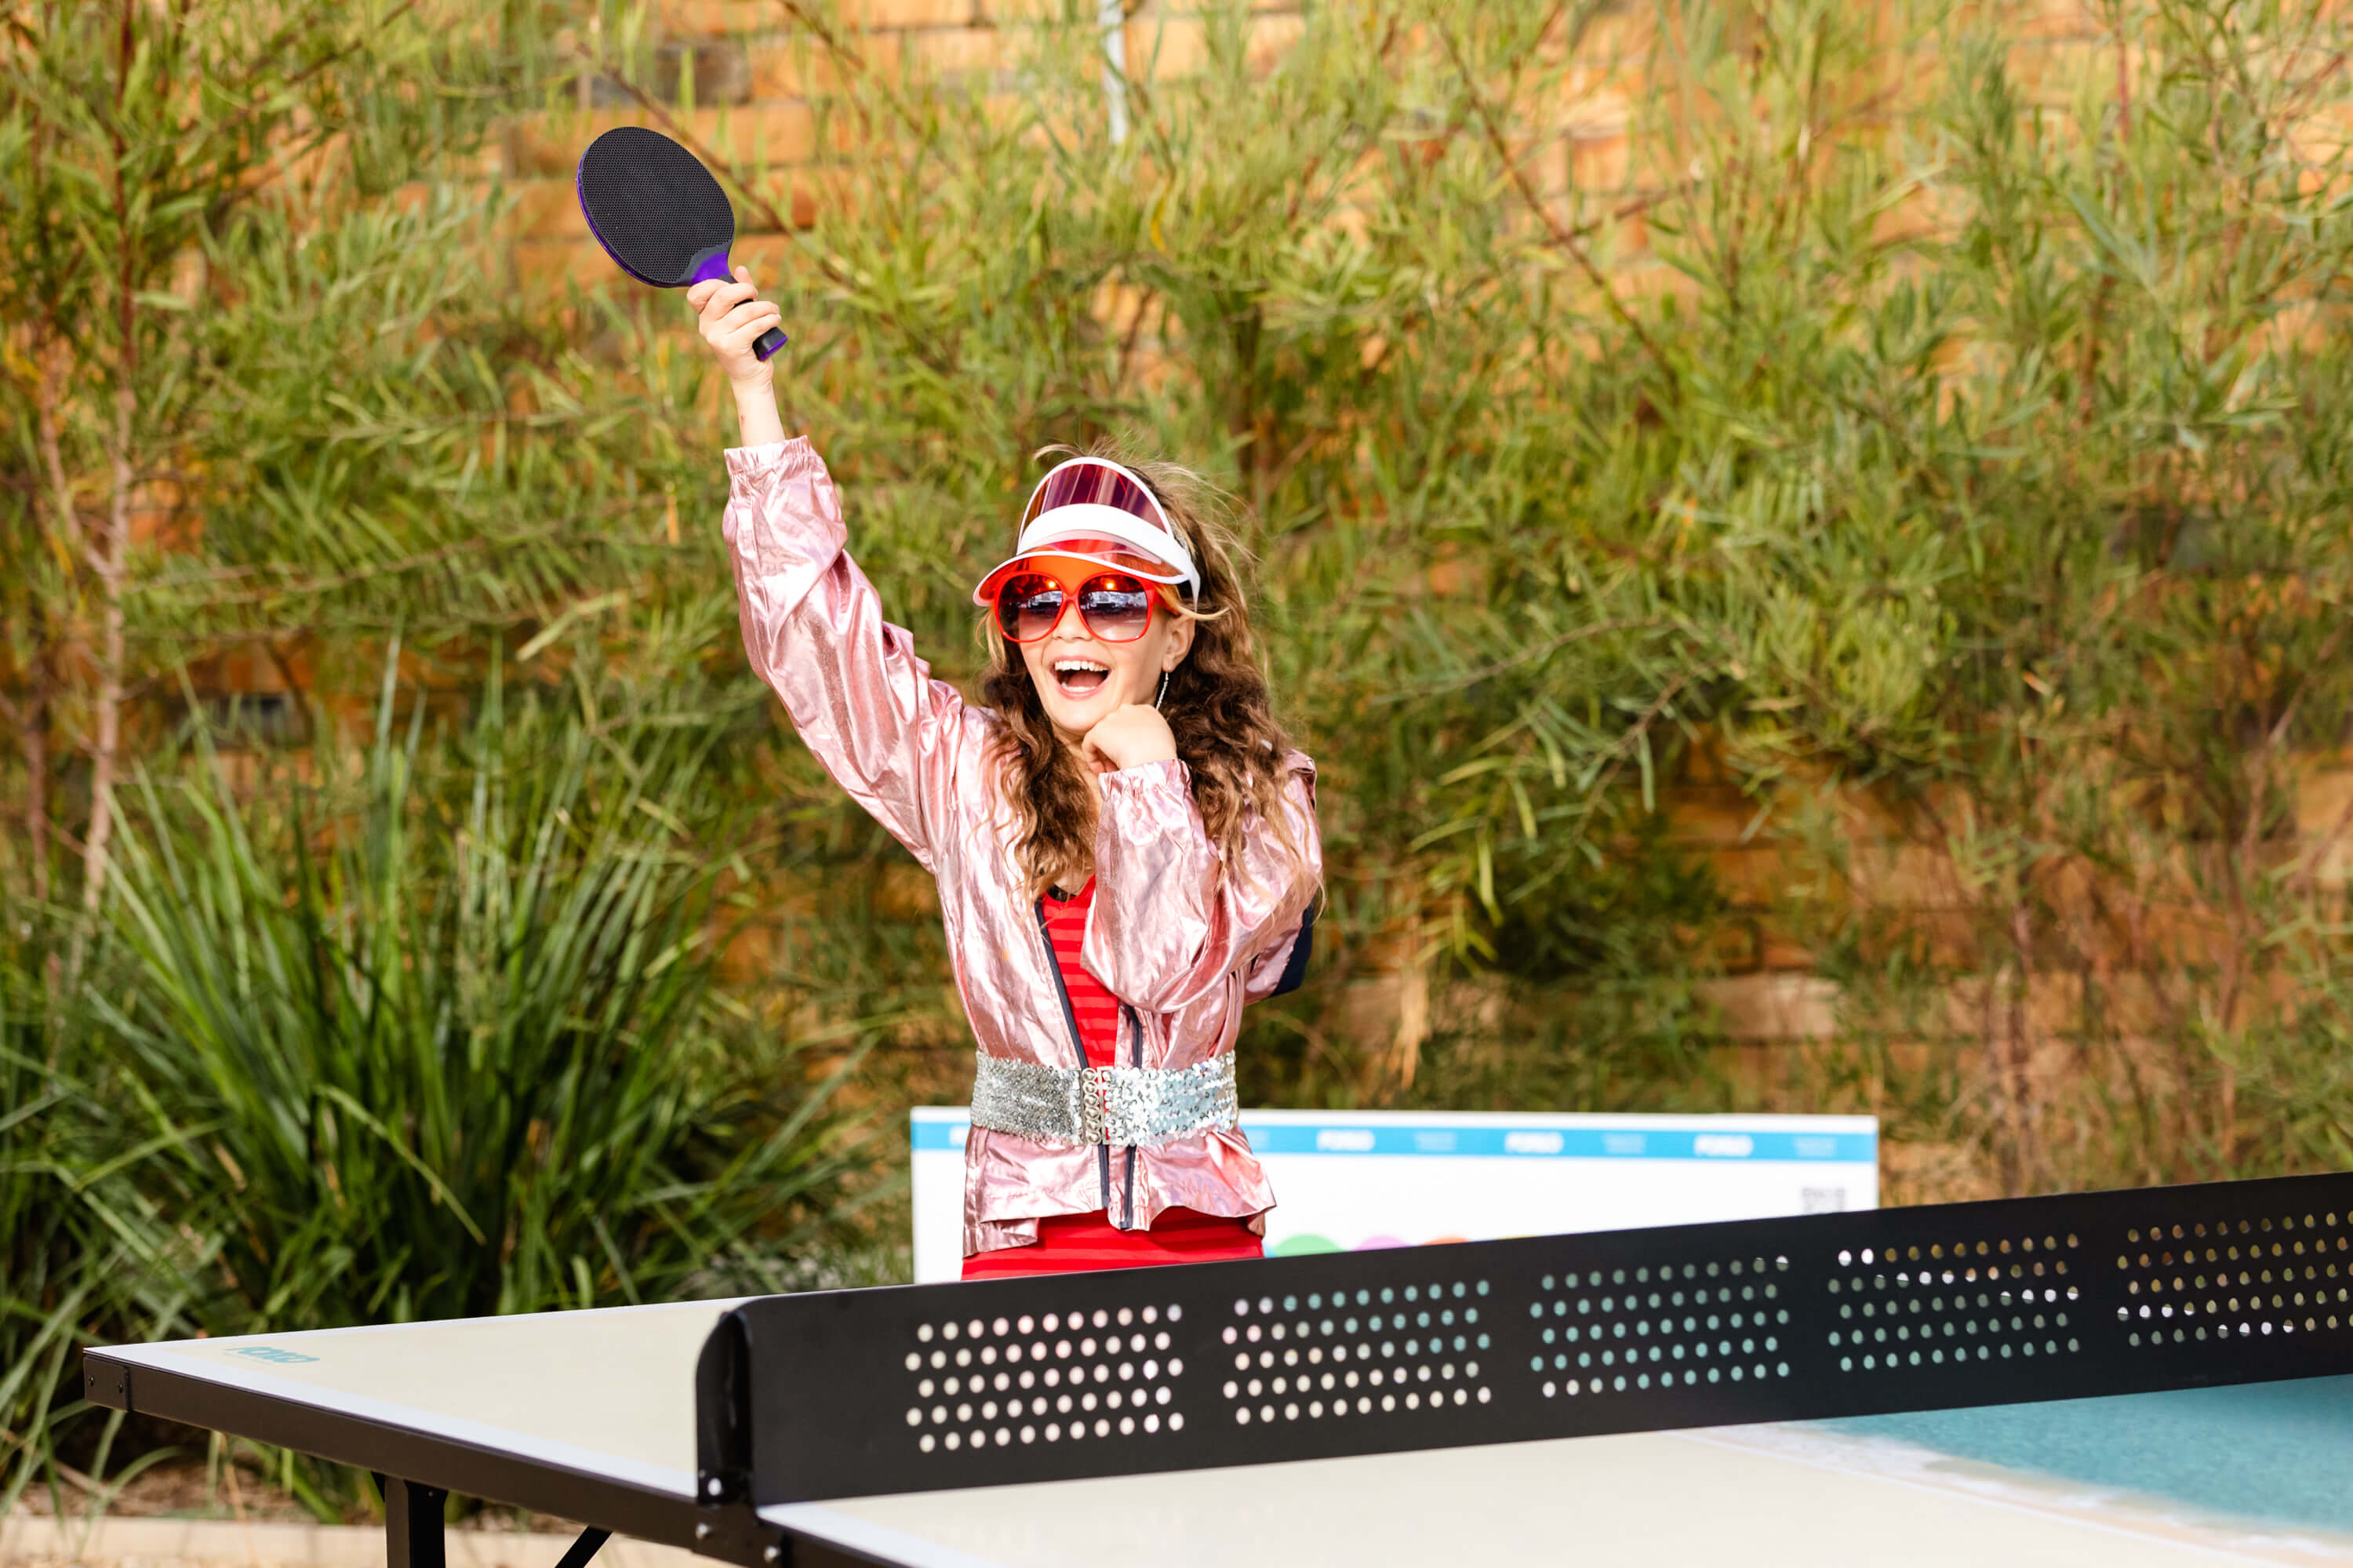 5 Interesting Table Tennis Facts You Might Not Know - Custom Table Tennis